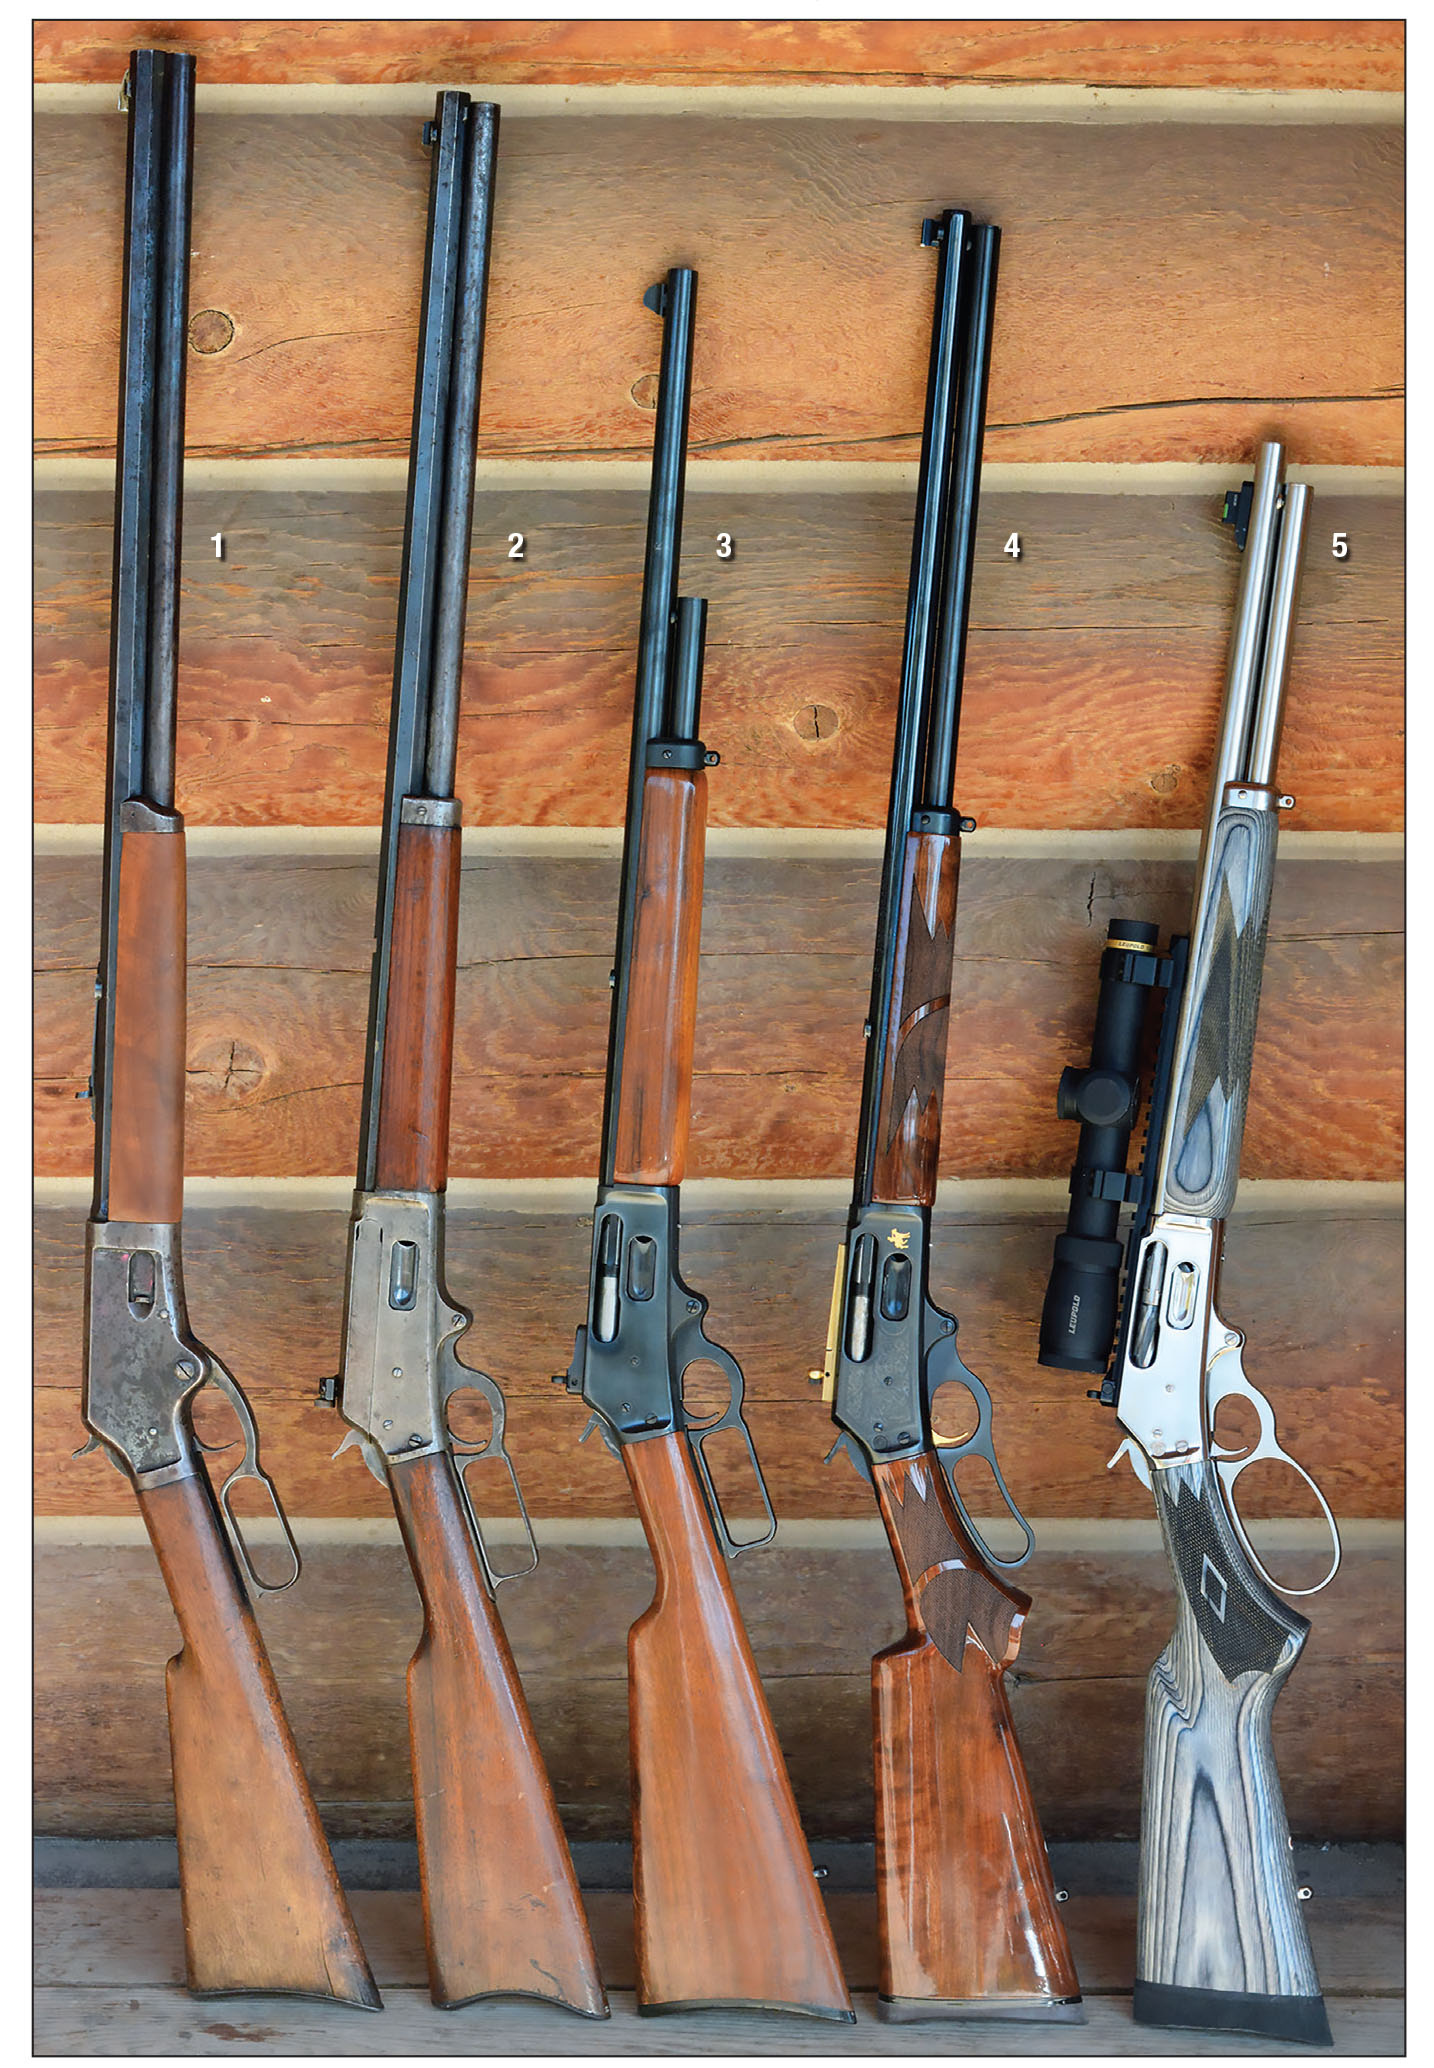 Marlin beat Winchester to the punch in offering a lever-action rifle chambered in 45-70 Government: (1) Marlin Model 1881, (2) original Marlin Model 1895, (3) 1972 era Model 1895, (4) Remington produced Marlin Model 1895 Limited Edition and (5) Ruger-produced Marlin Model 1895 SBL.